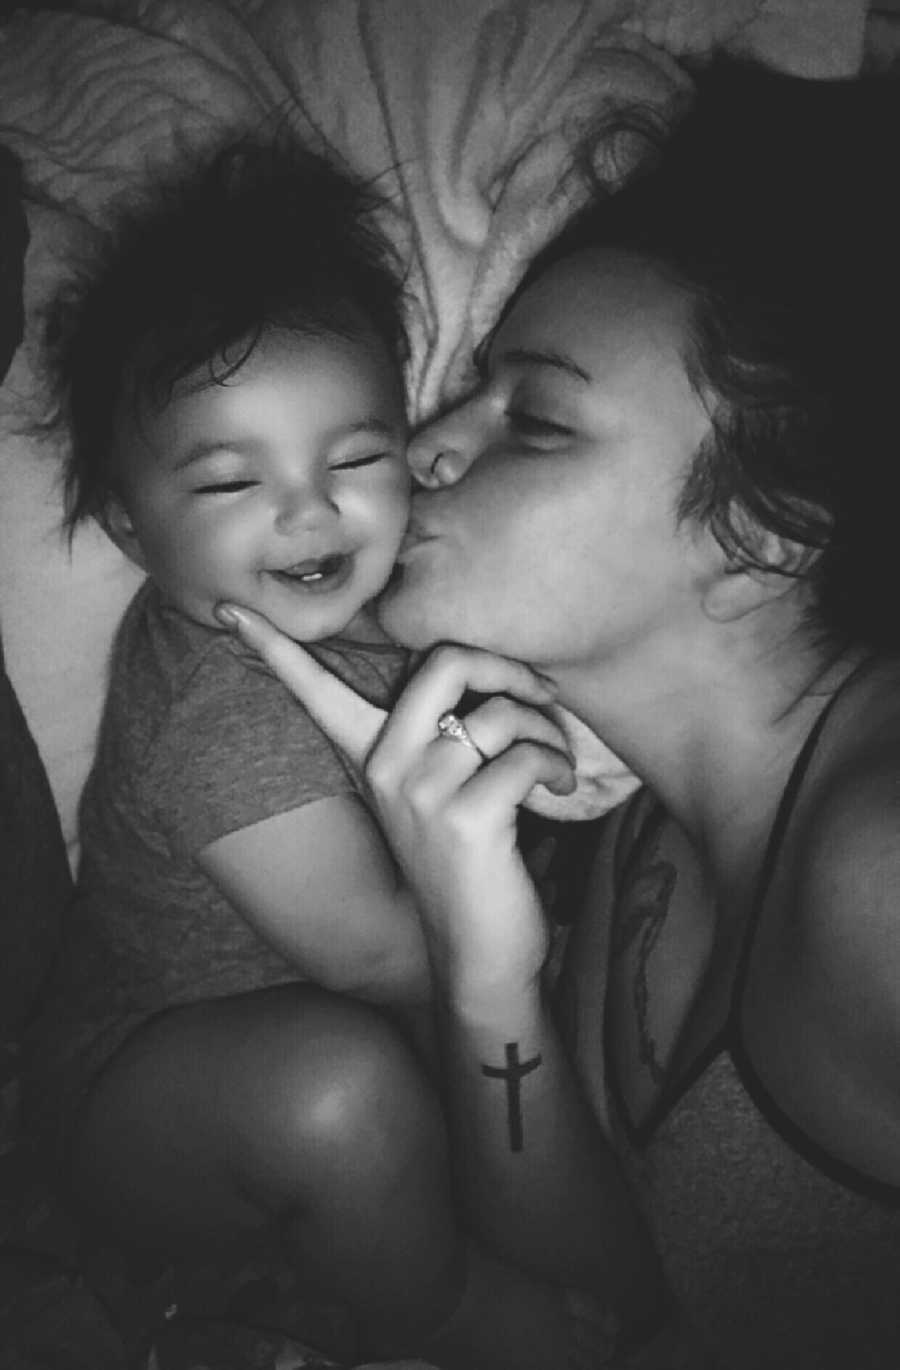 Mother who had near death experience kisses baby on cheek in selfie